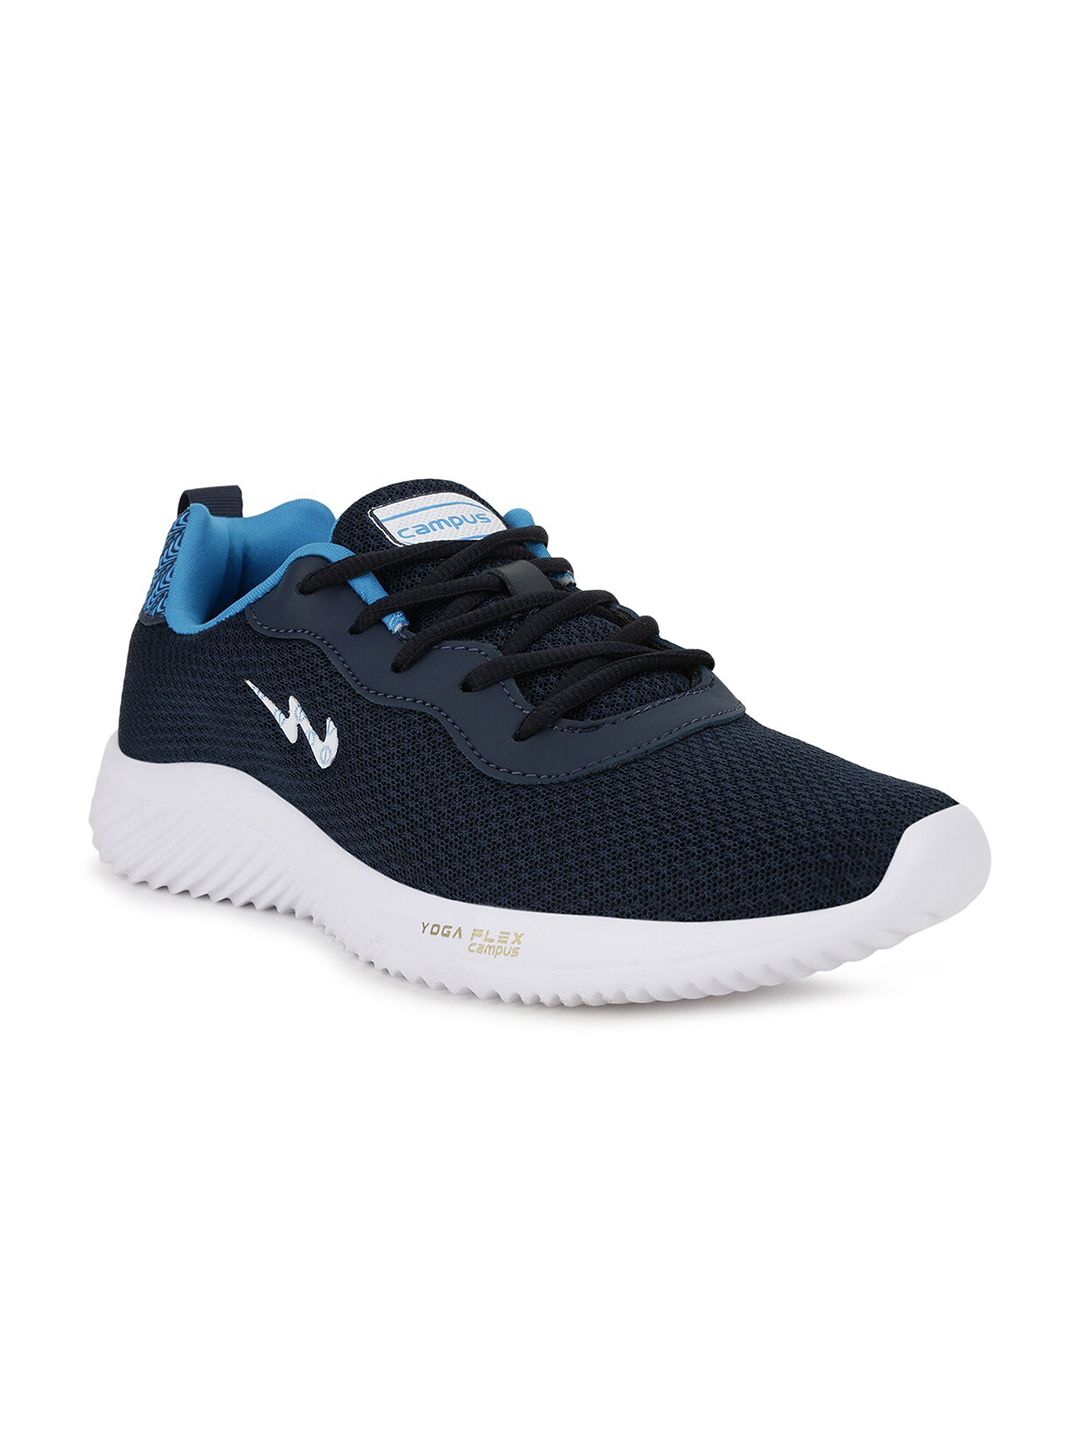 Campus Women Navy Blue Mesh Running Sports Shoes Price in India